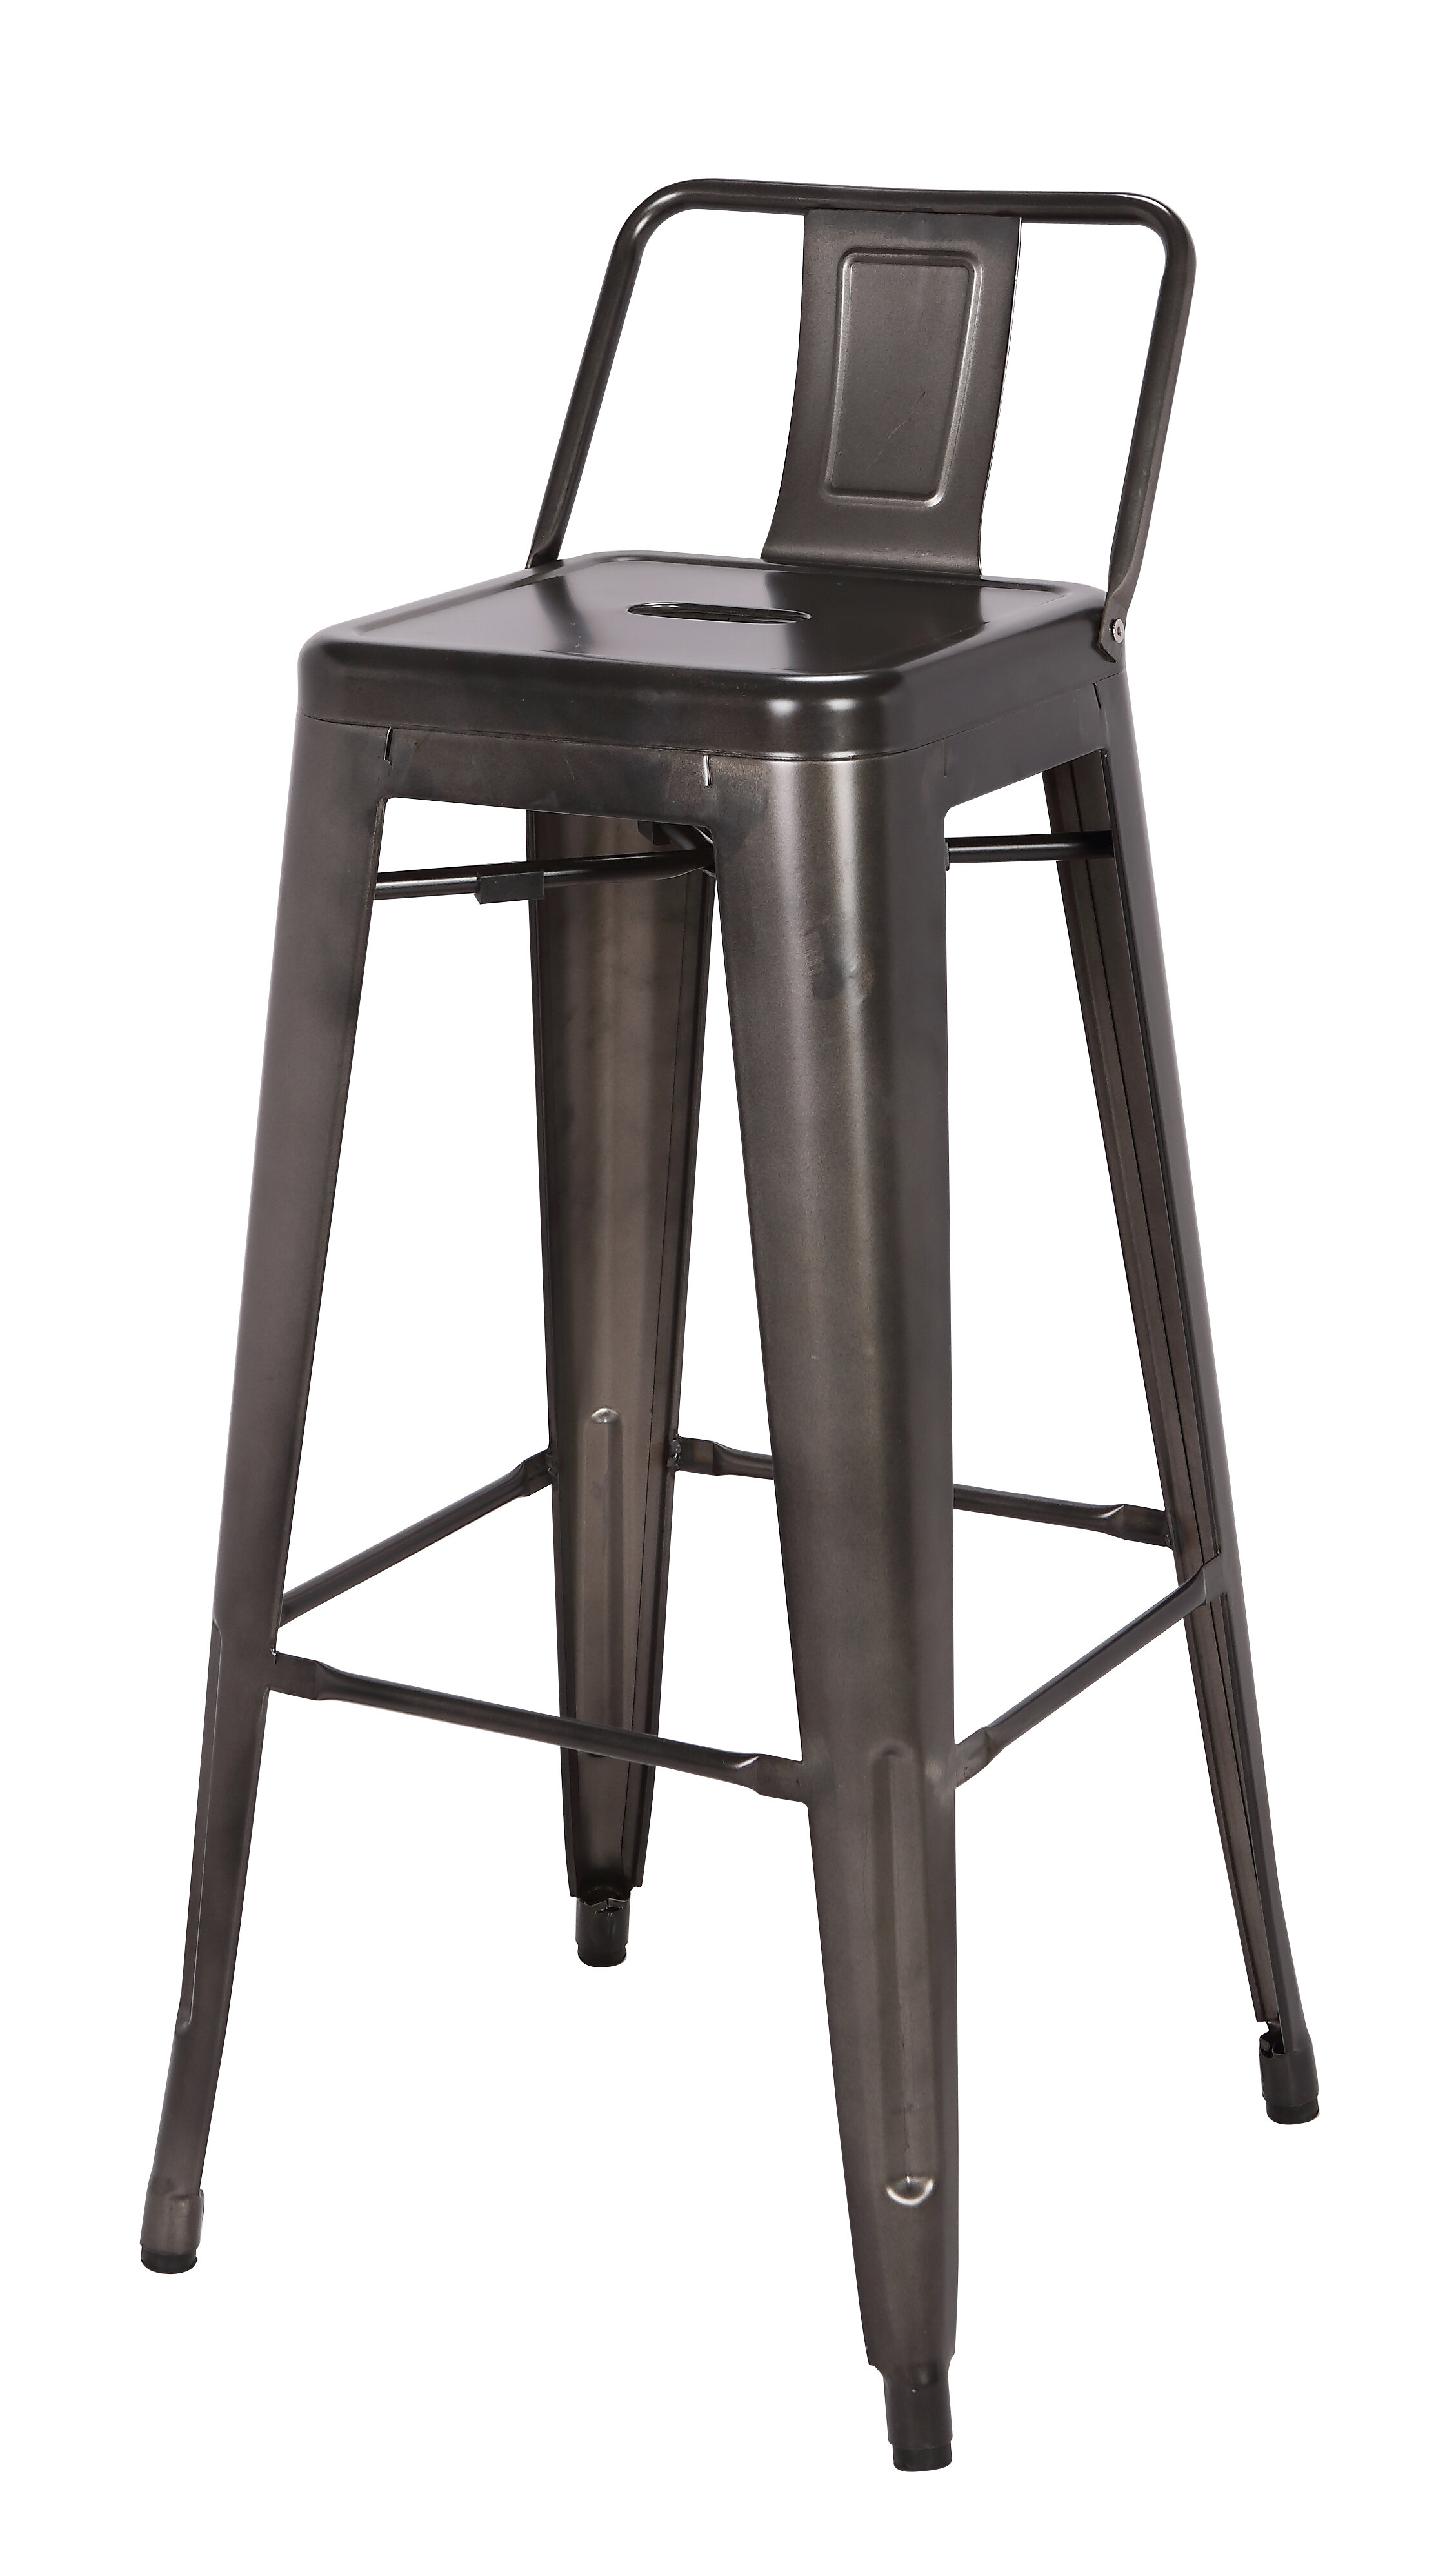 bar stools with backs for kitchen island